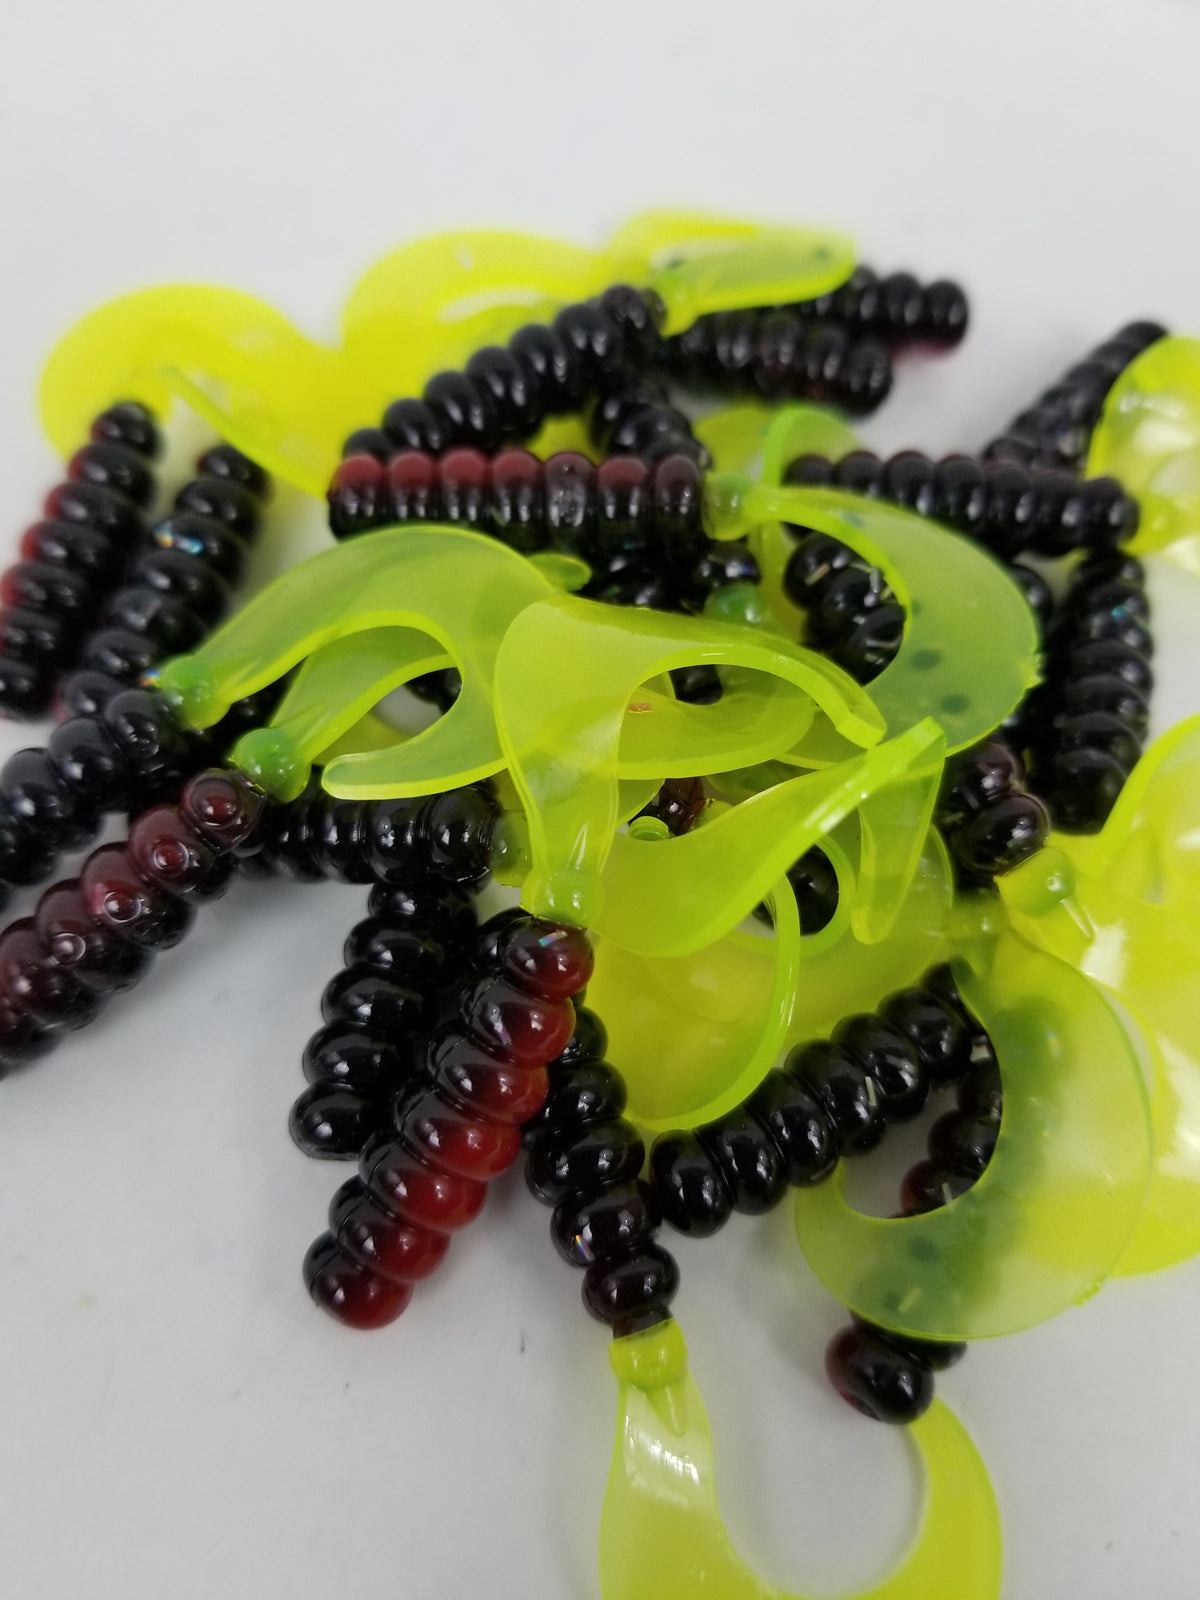 Cam's 2"(HOLOGRAM FLAKE)  Curly Tail Grub 40pc Red Black & Chartreuse Curly Tail Crappie Soft Jigs  [A Cam's Exclusive]